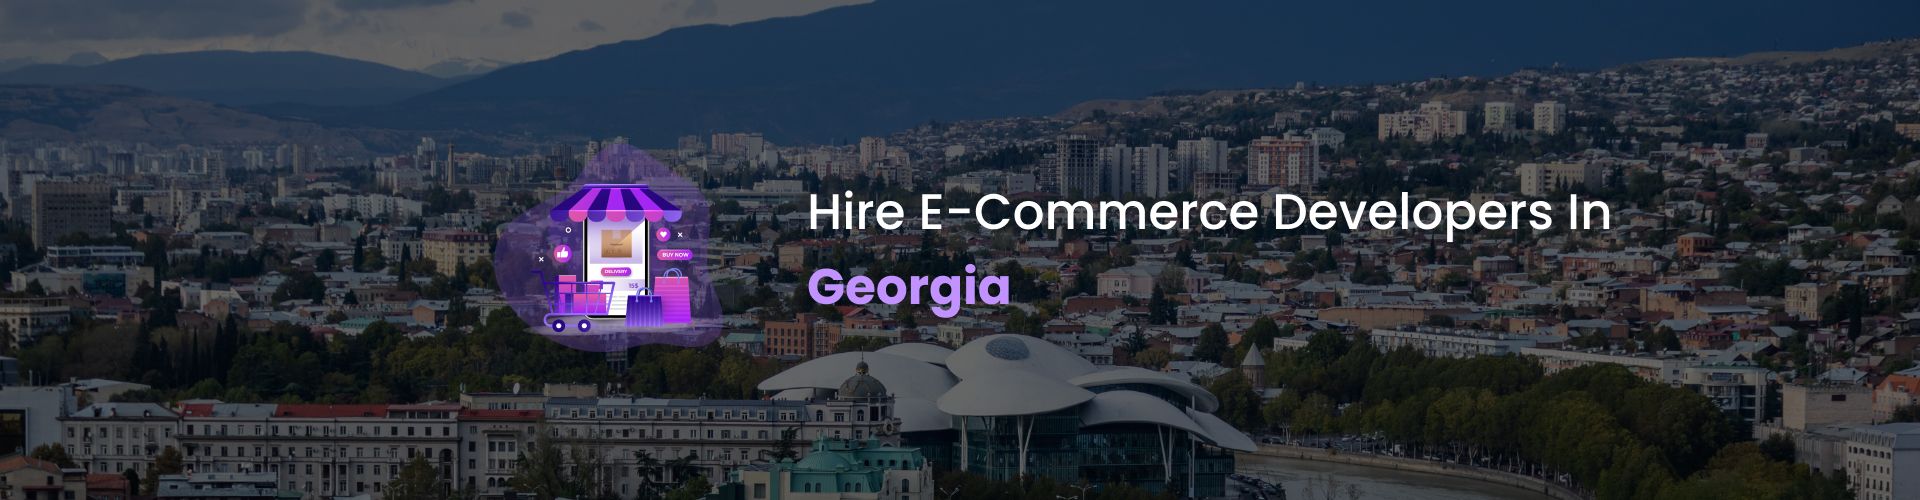 hire ecommerce developers in georgia